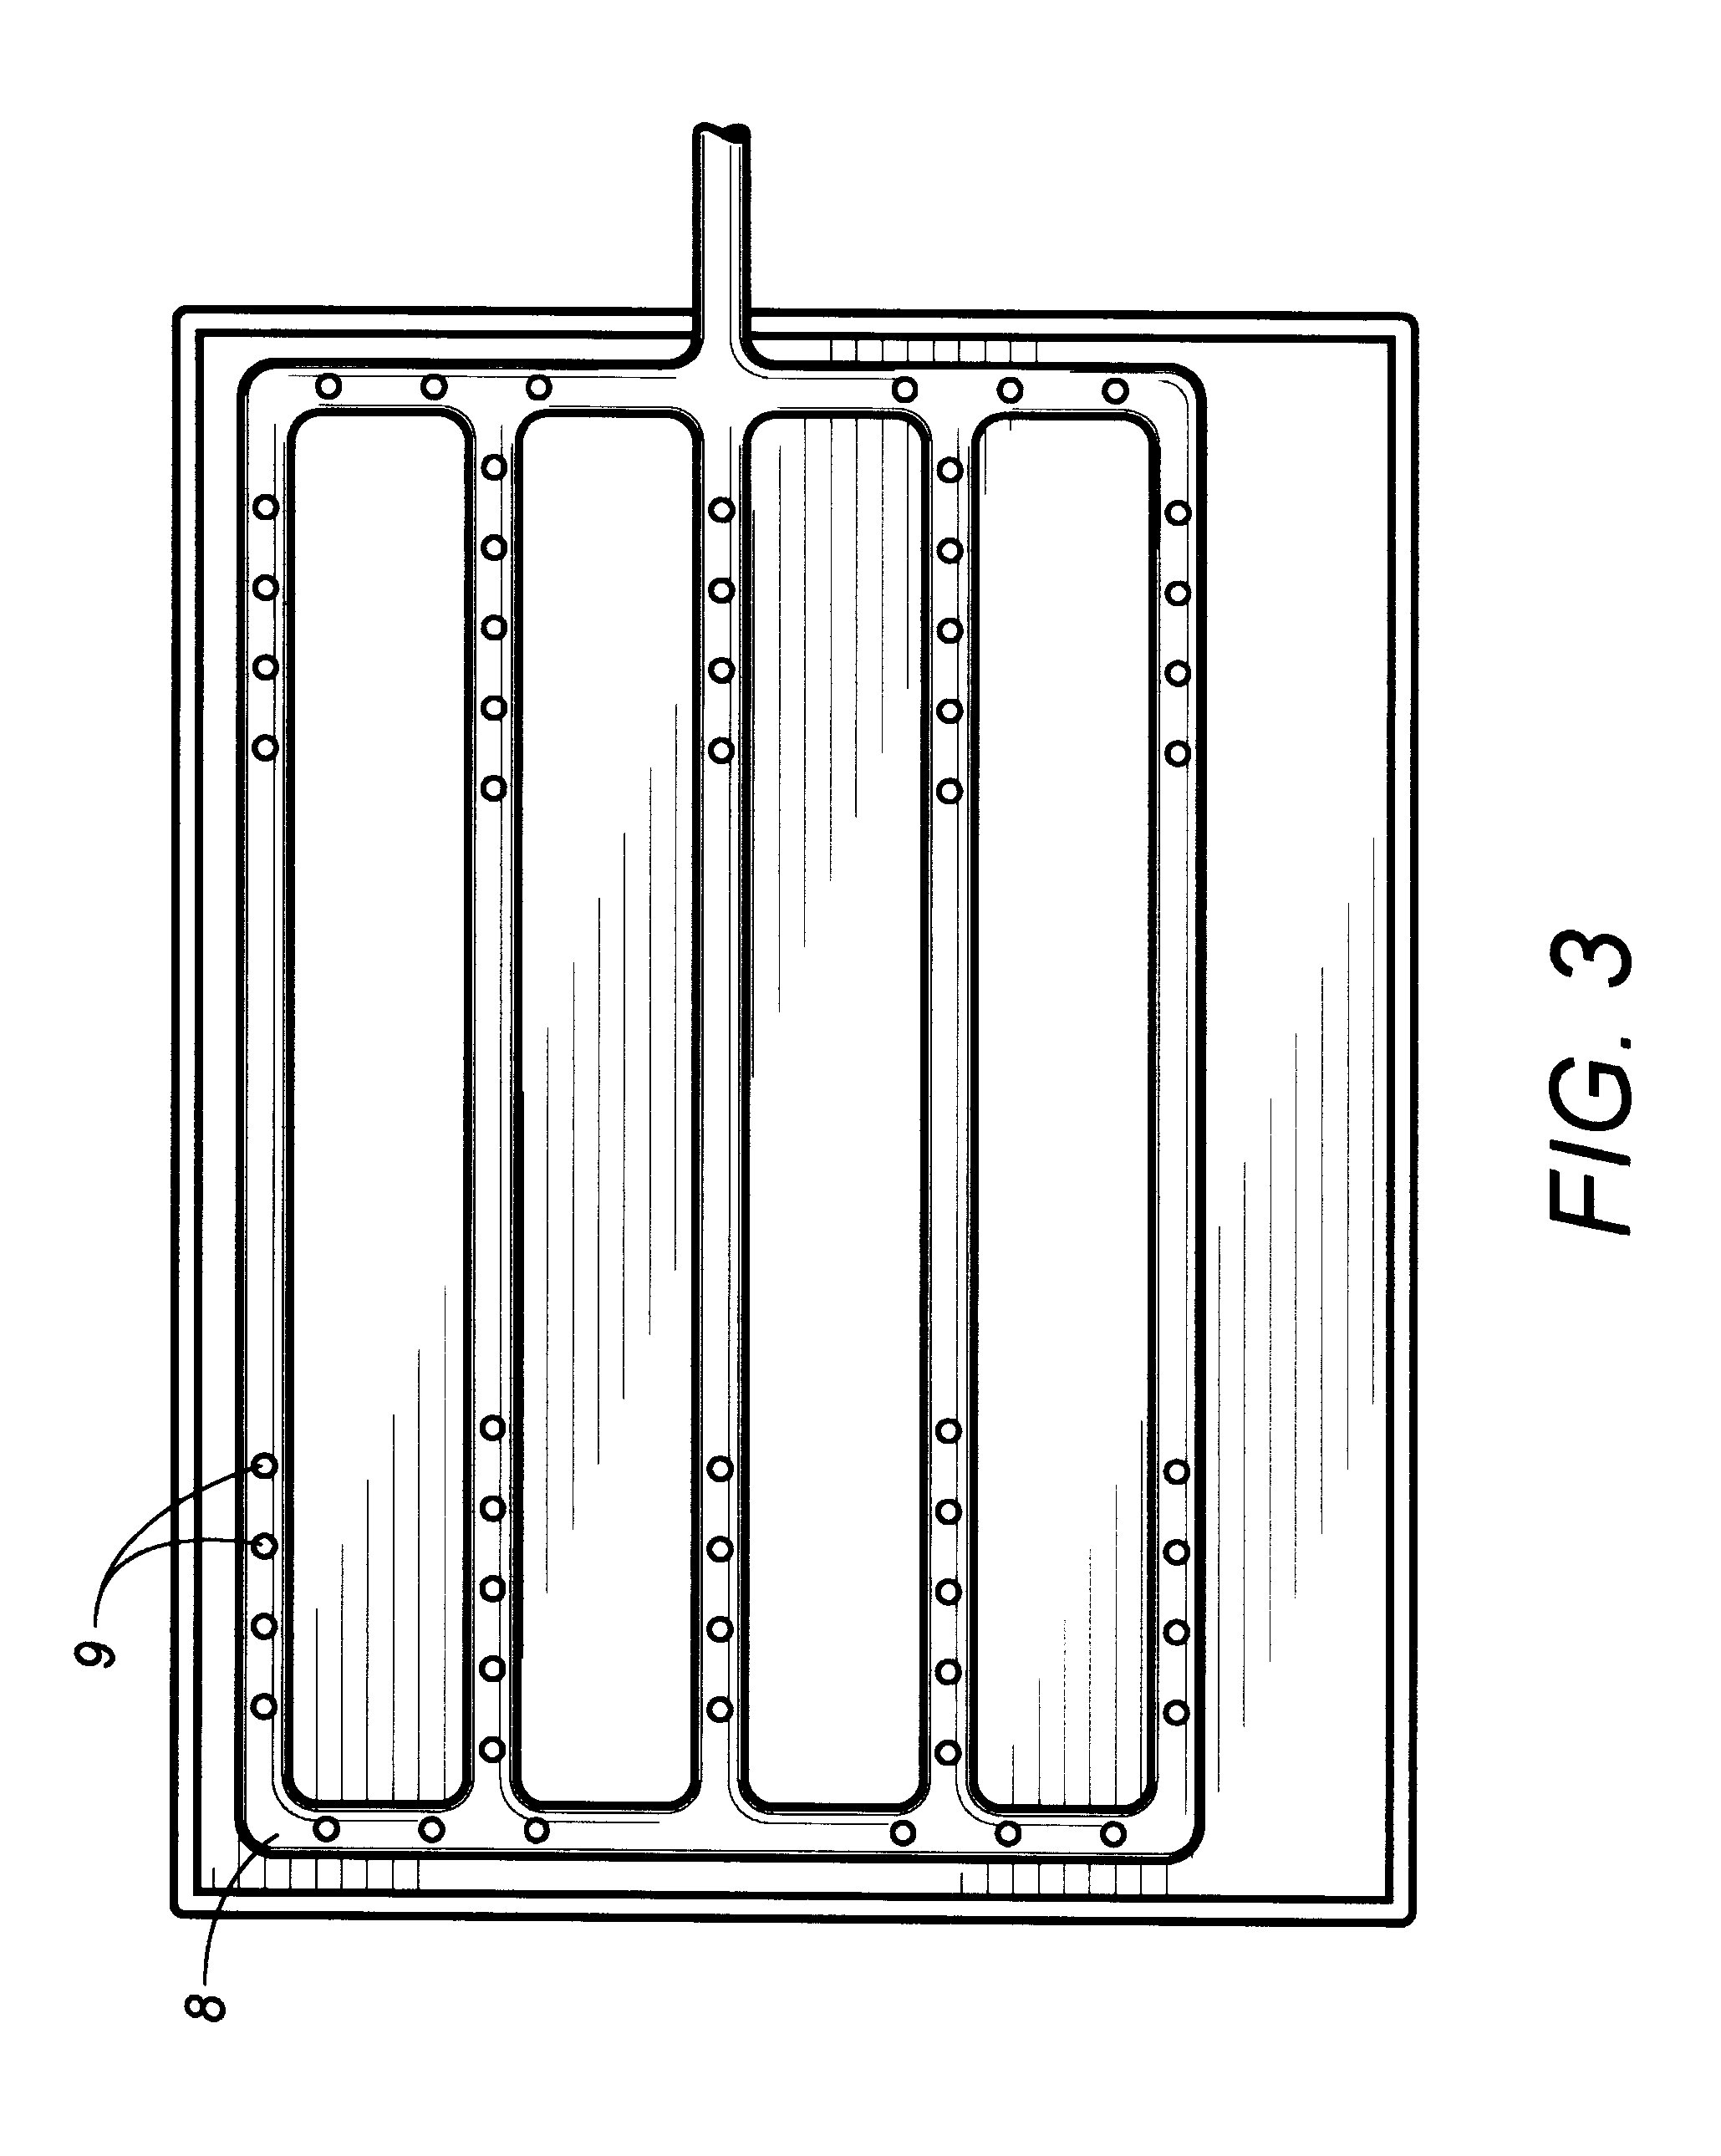 Air cleaner for removing air pollutants by water spray type of dust collecting system